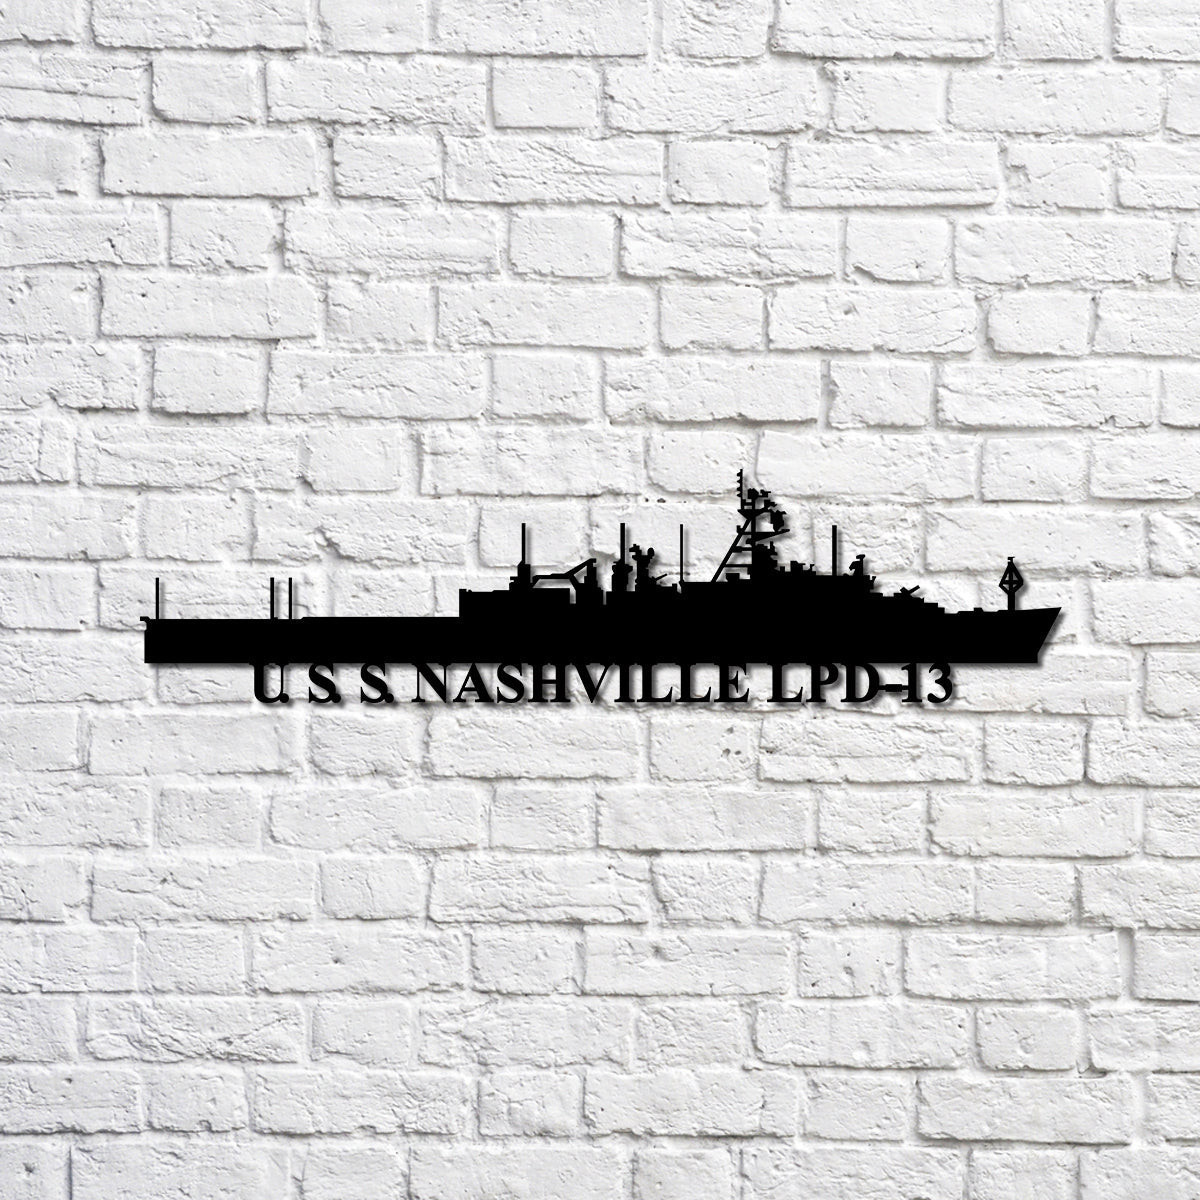 Uss Nashville Lpd13 Navy Ship Metal Sign, Memory Wall Metal Sign Gift For Navy Veteran, Navy Ships Silhouette Metal Sign Laser Cut Metal Signs Custom Gift Ideas 12x12IN